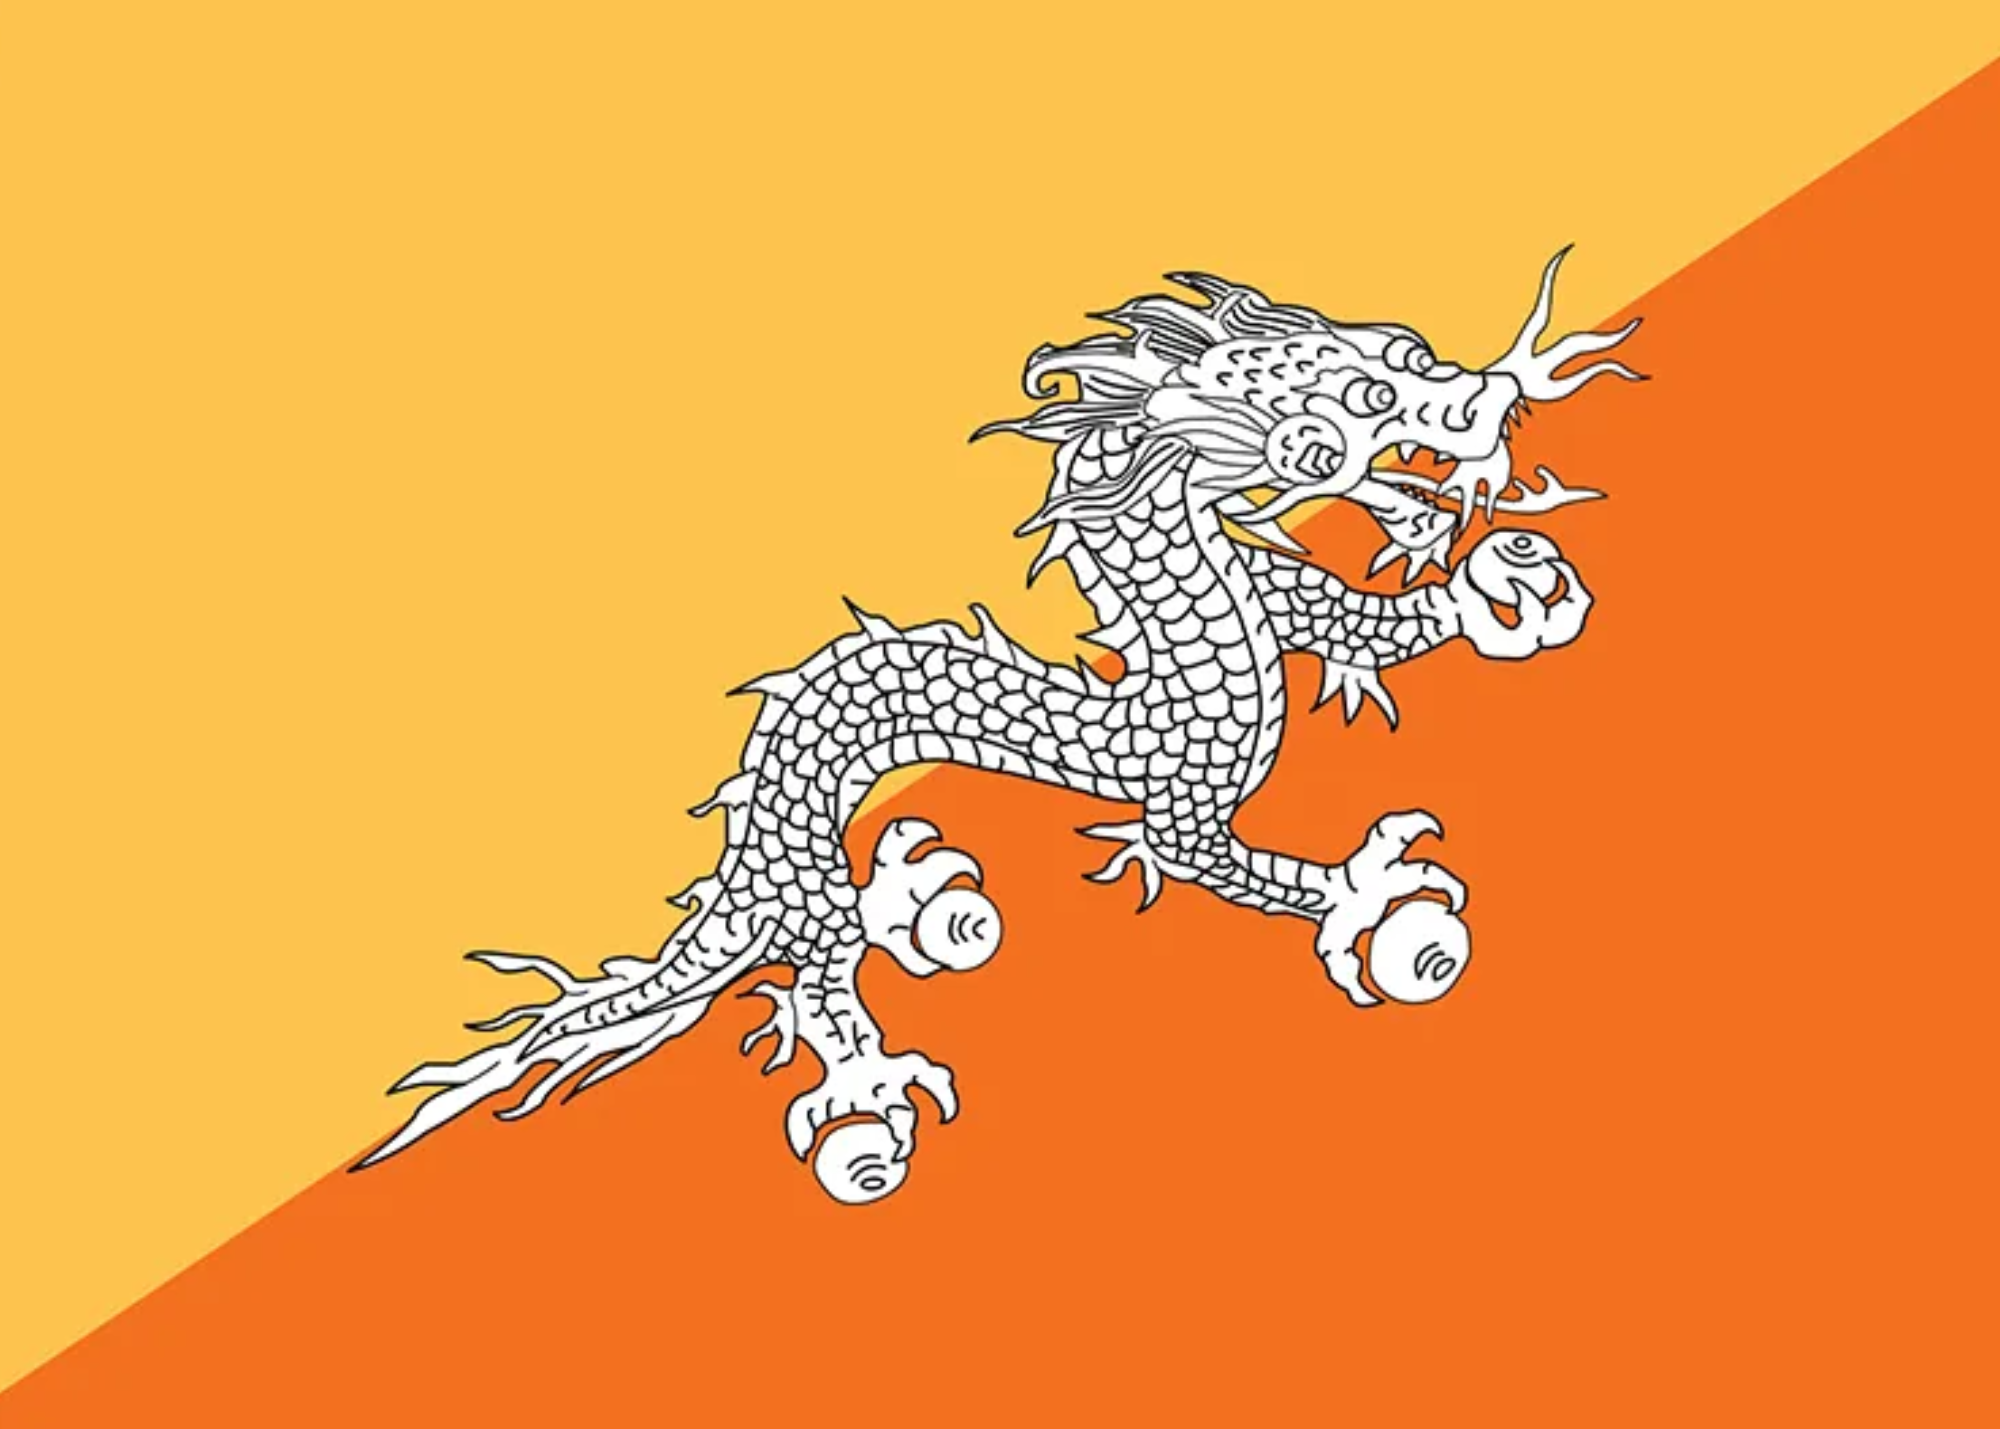 The state flag of Bhutan has a white dragon in the middle of a yellow-orange stripe over an orange-red stripe